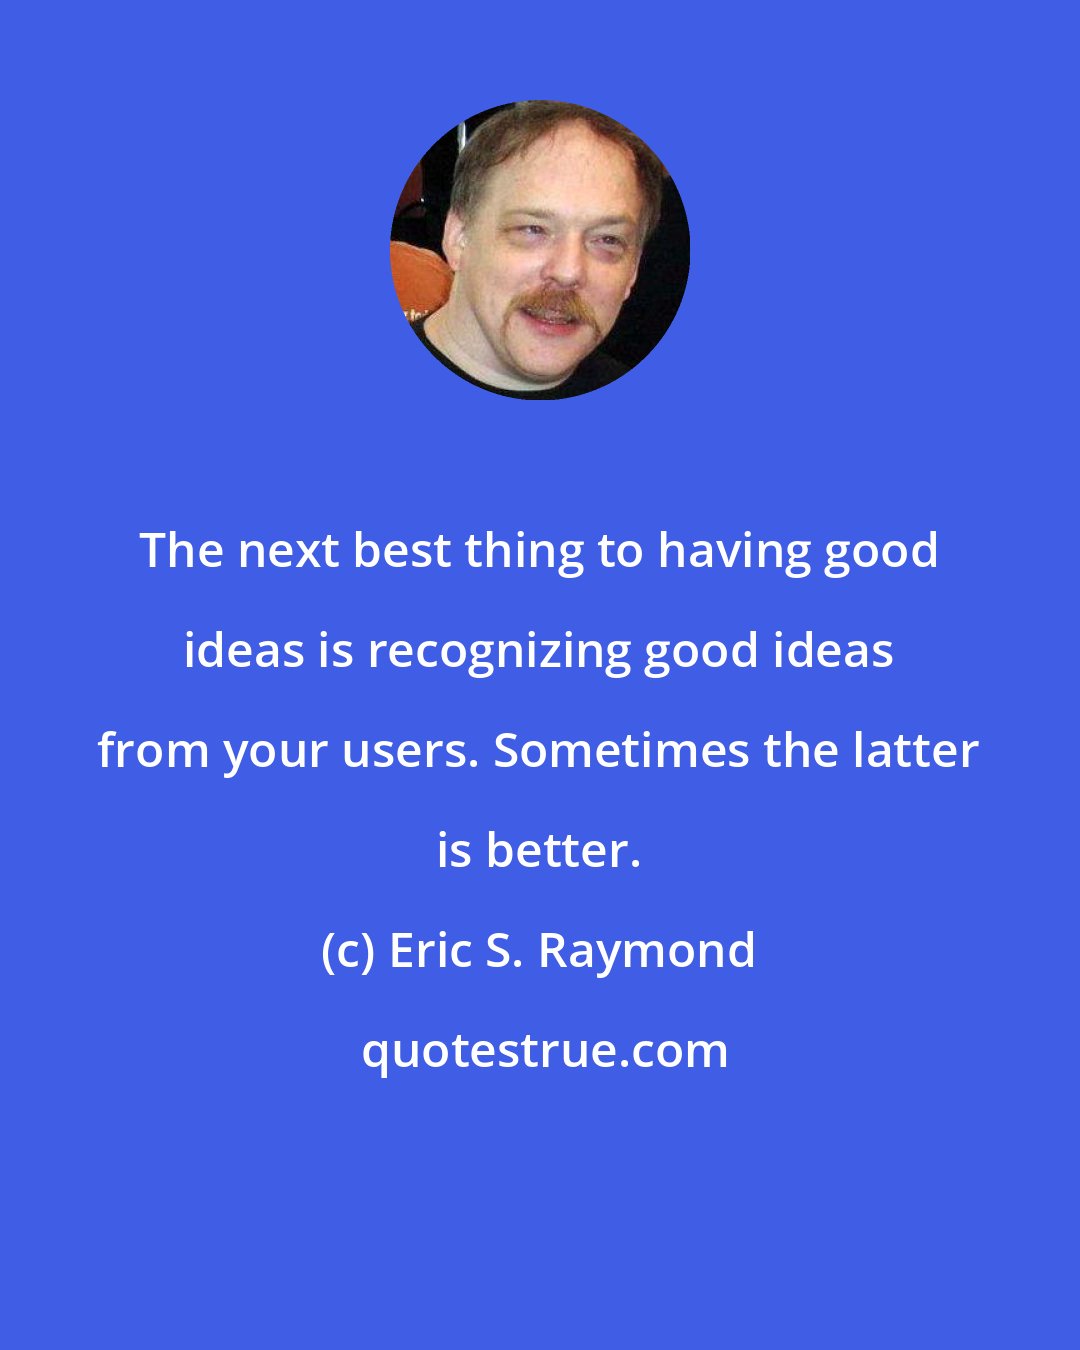 Eric S. Raymond: The next best thing to having good ideas is recognizing good ideas from your users. Sometimes the latter is better.